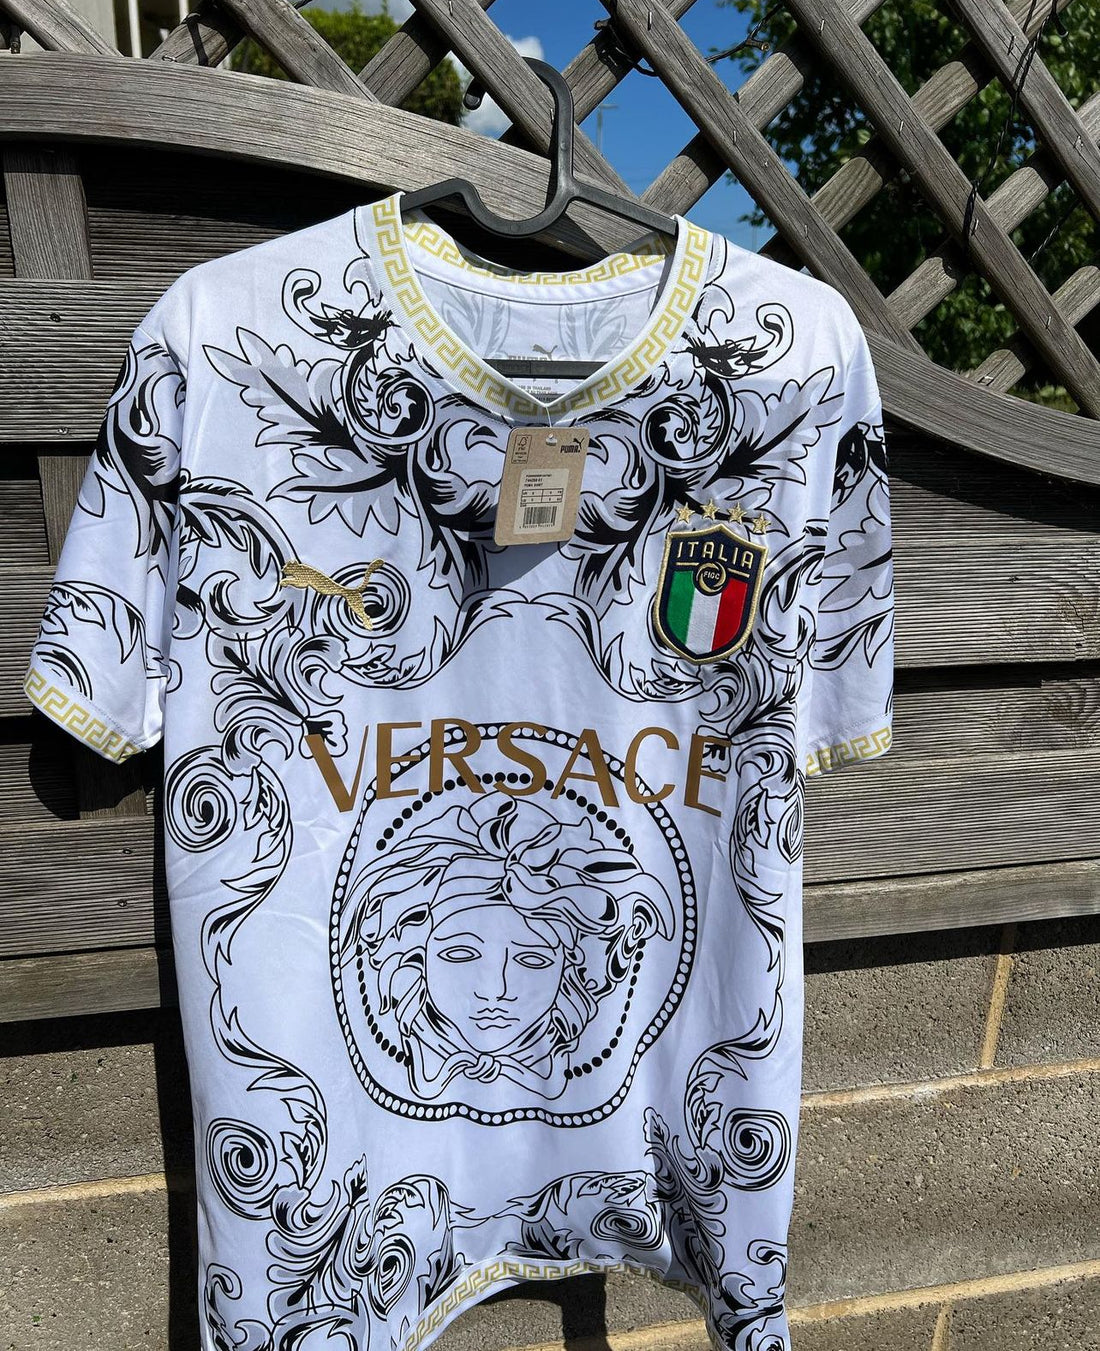 The Kit That Everyone Is Looking For: Italy x Versace